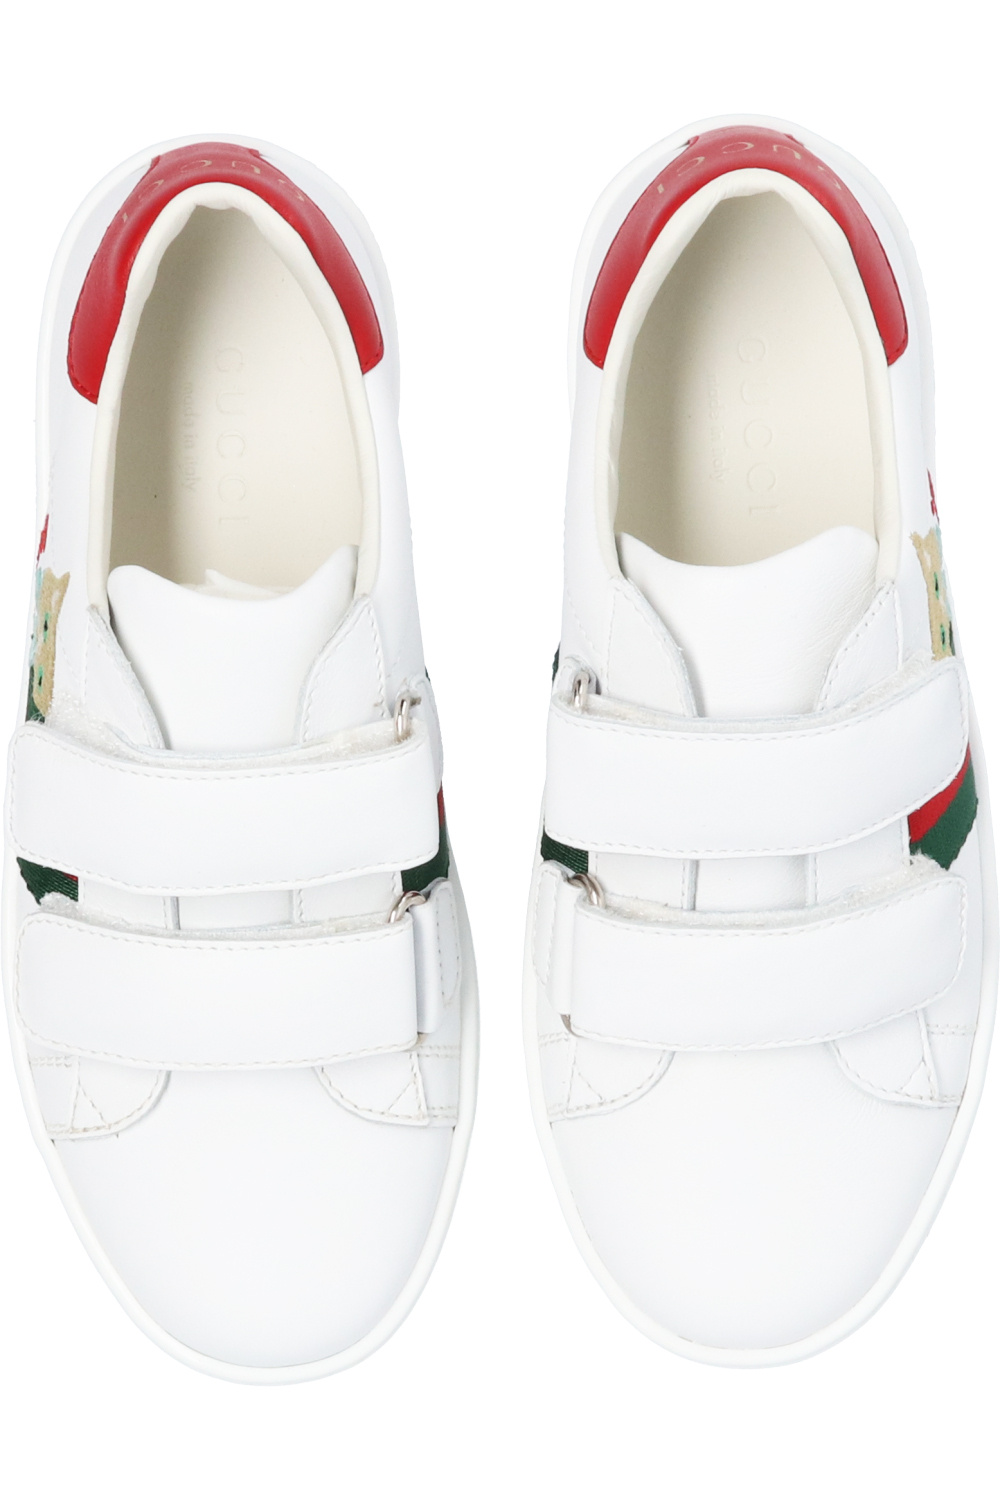 gucci Women Kids Sneakers with logo